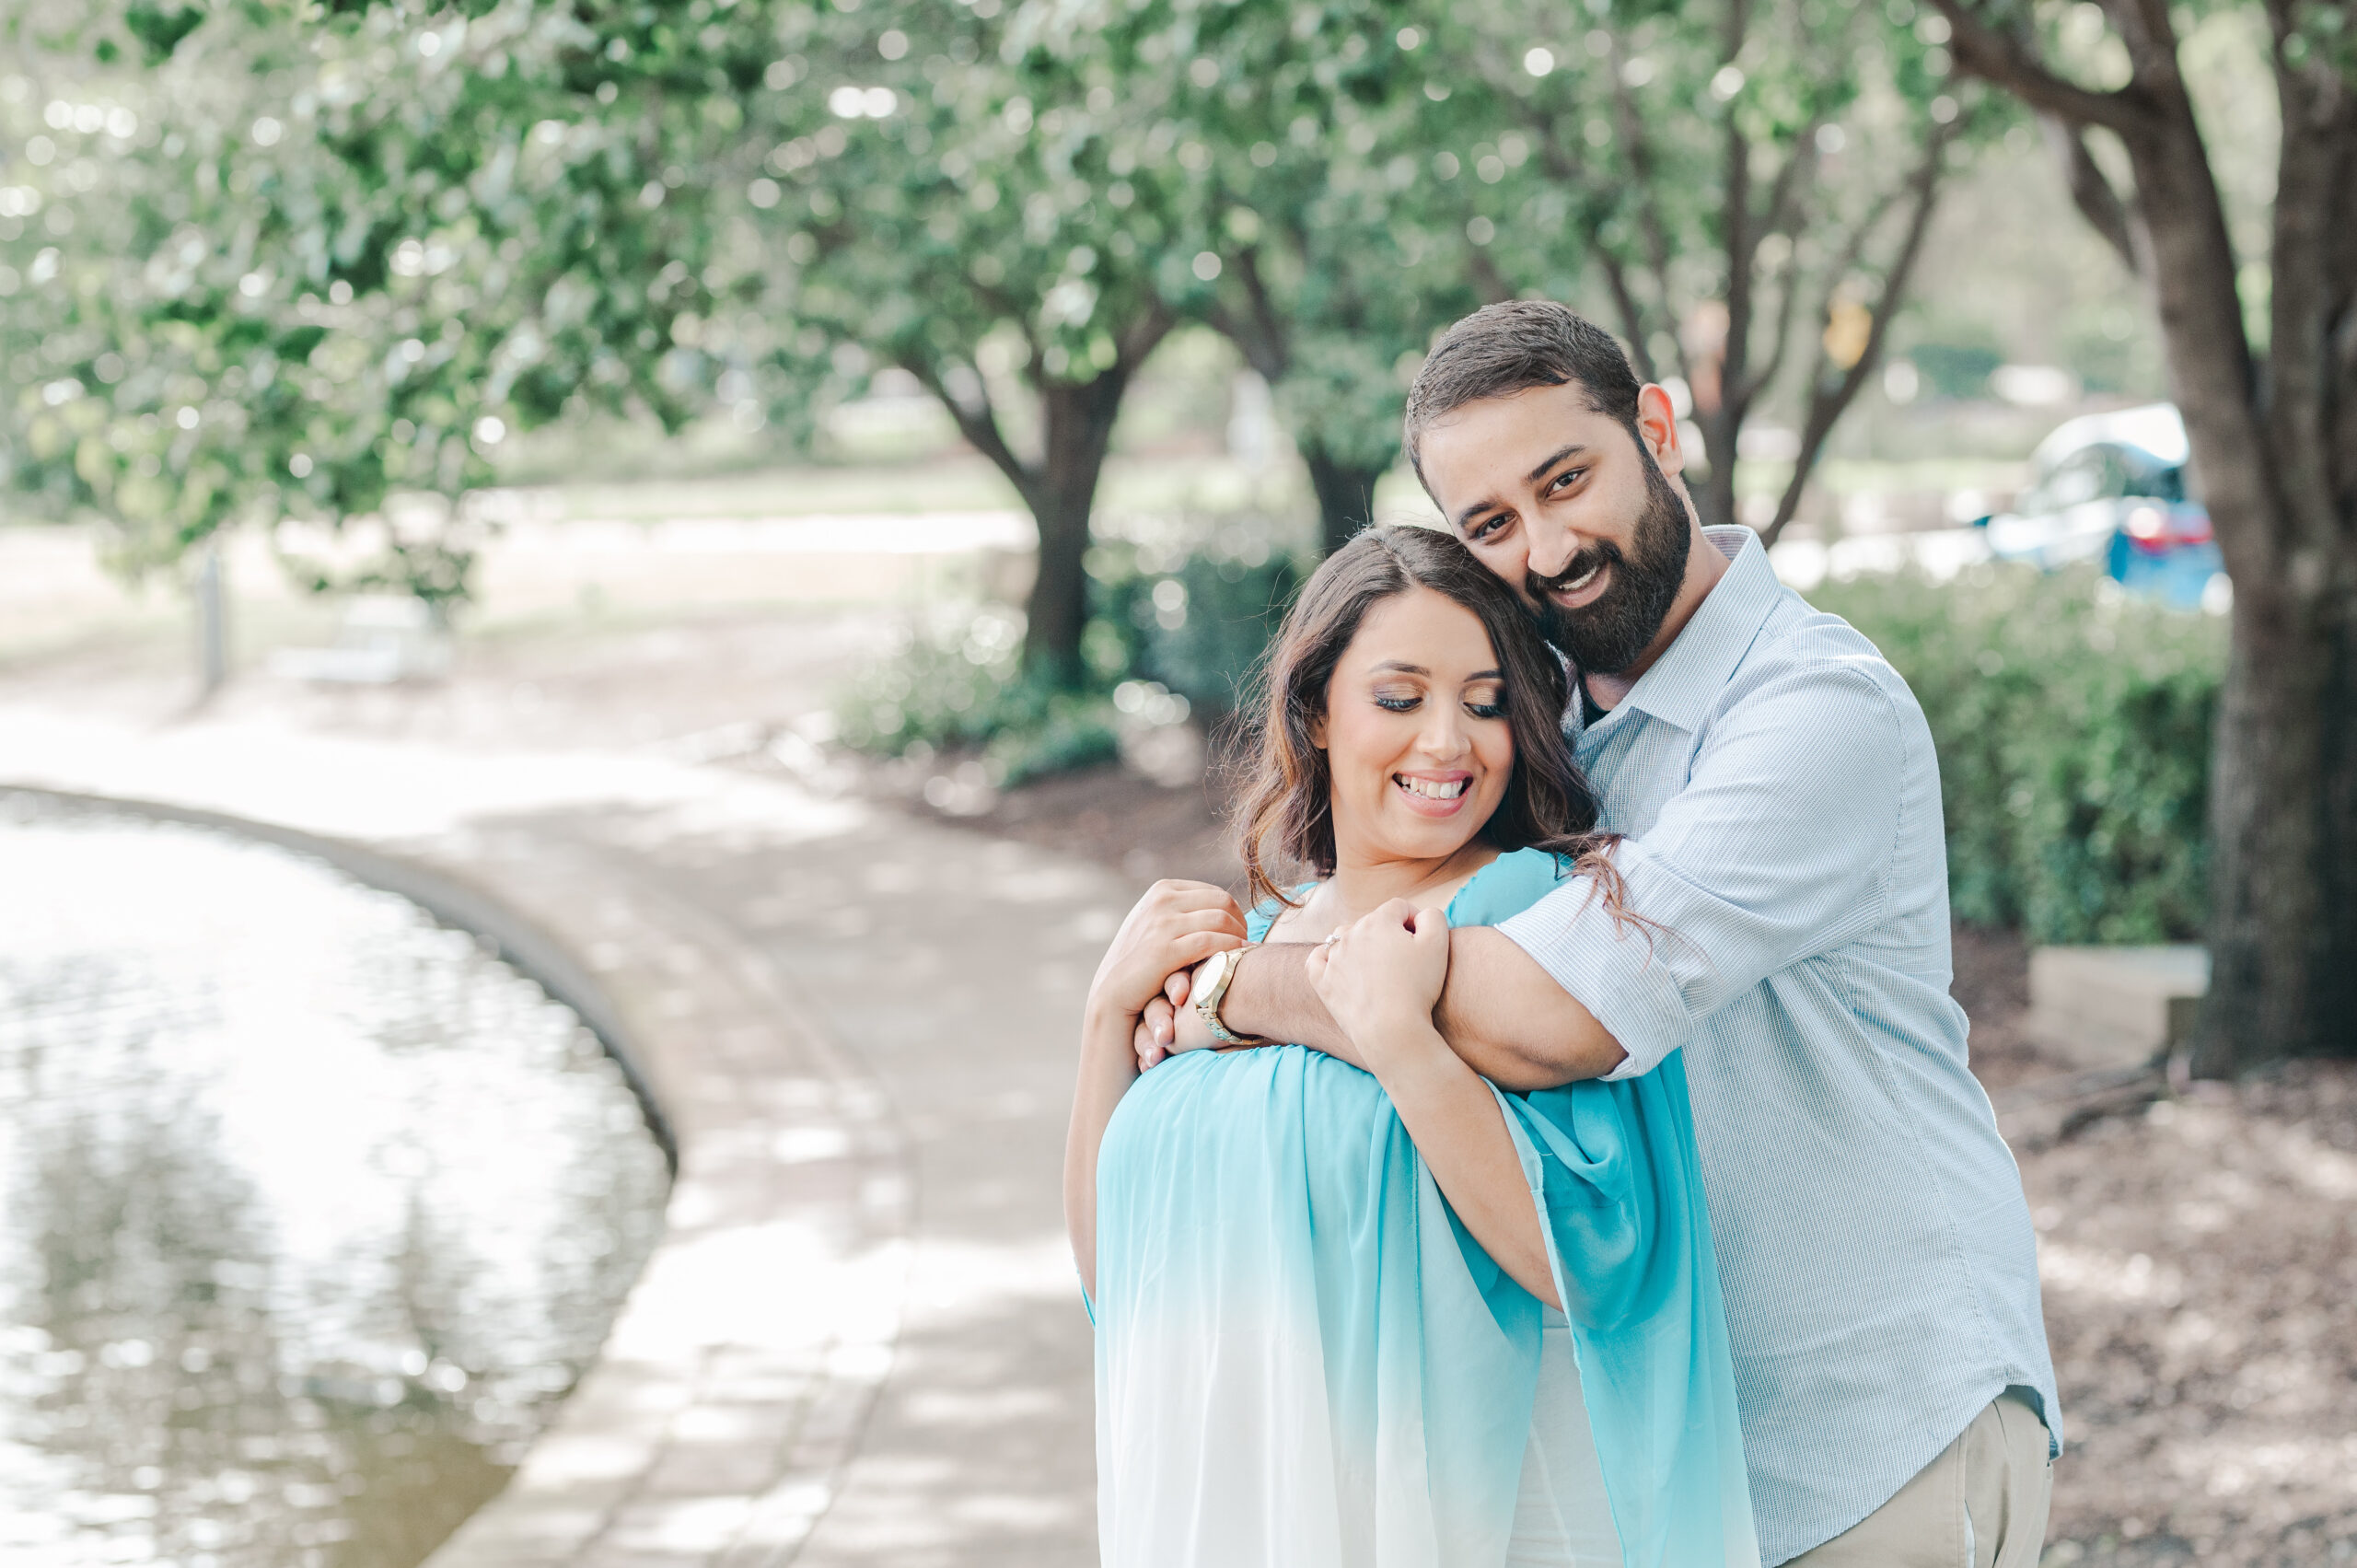 Why you should schedule an engagement shoot before your wedding